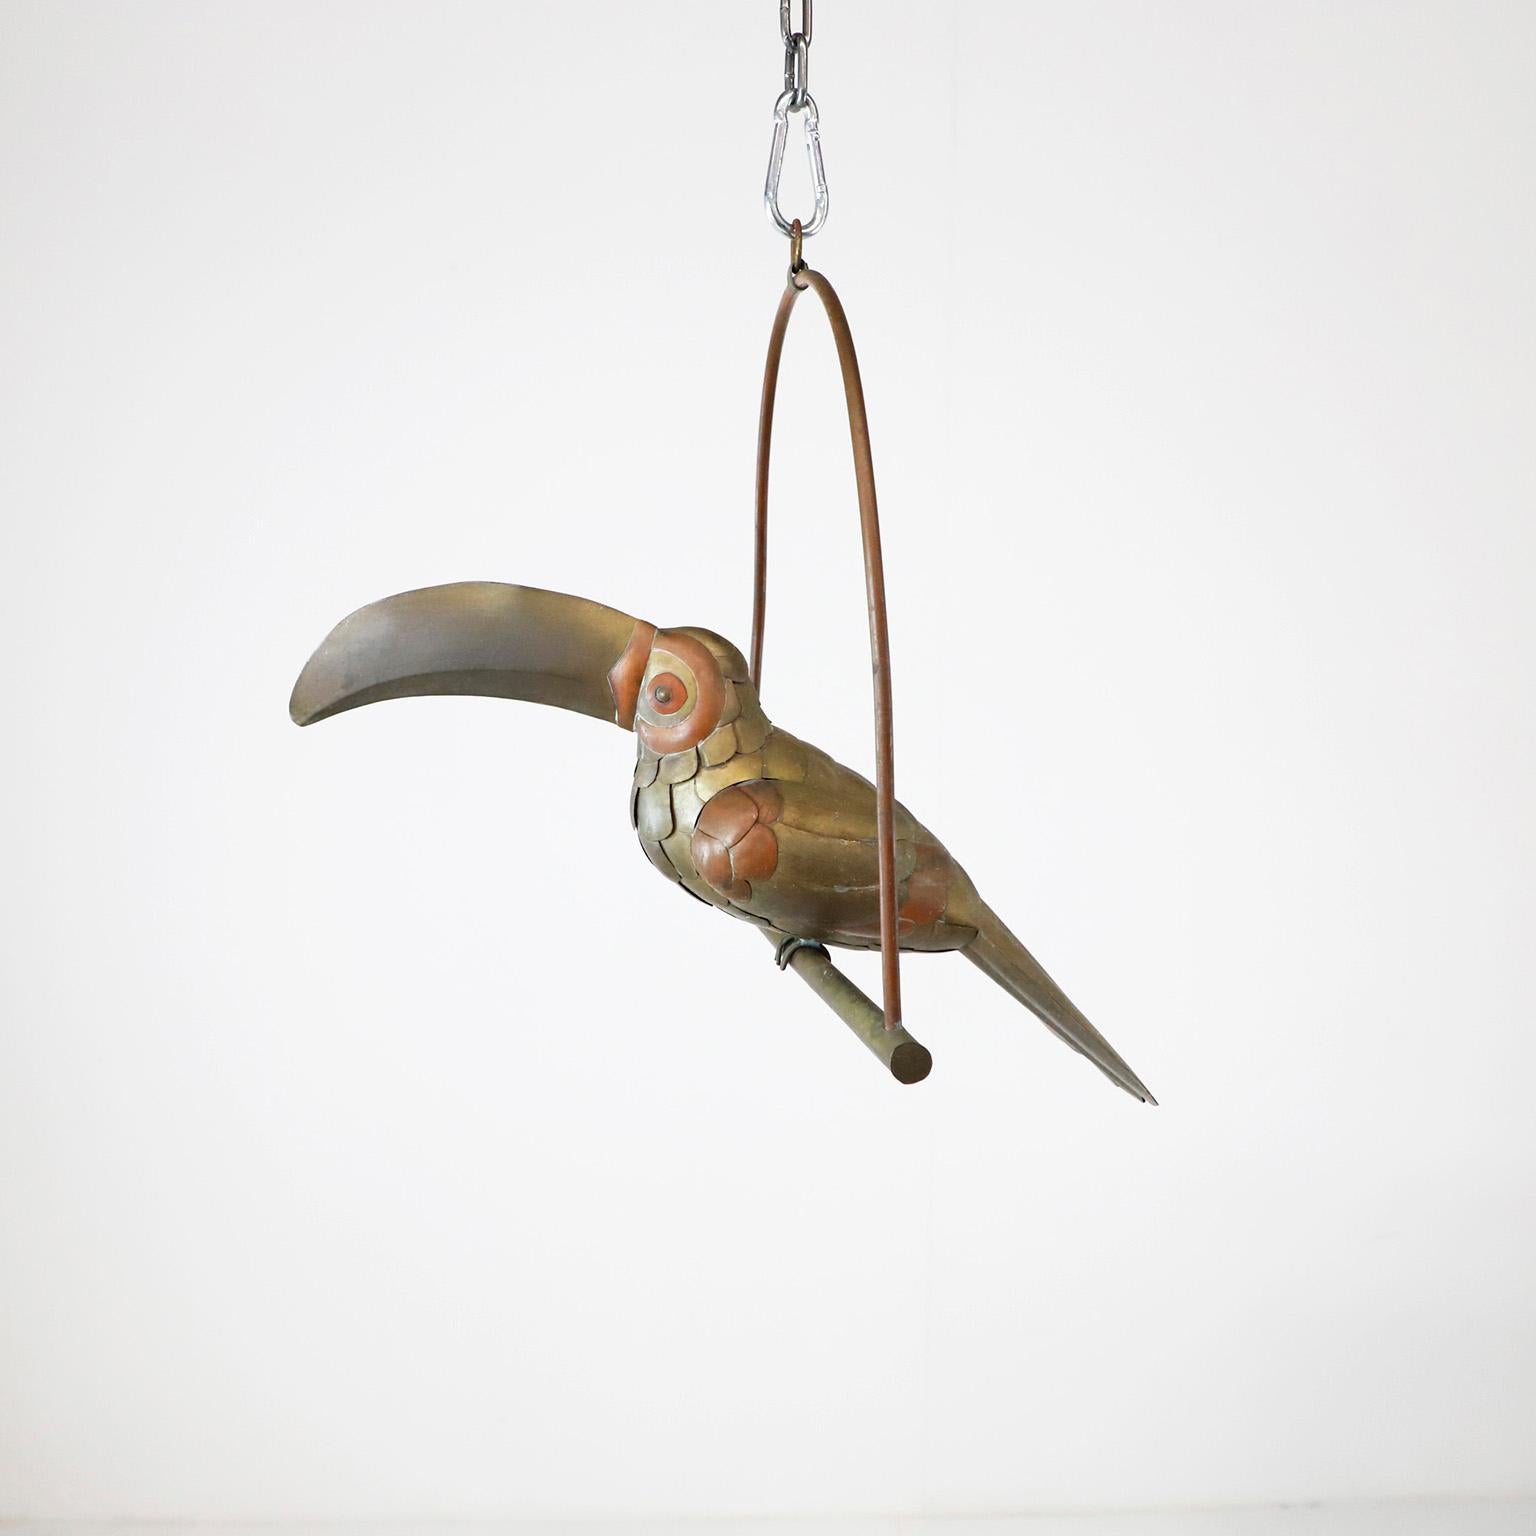 We offer this petite Toucan on hanging perch figure in the style of Sergio Bustamante, circa 1960 made in brass and copper with fantastic patina. Present some details.